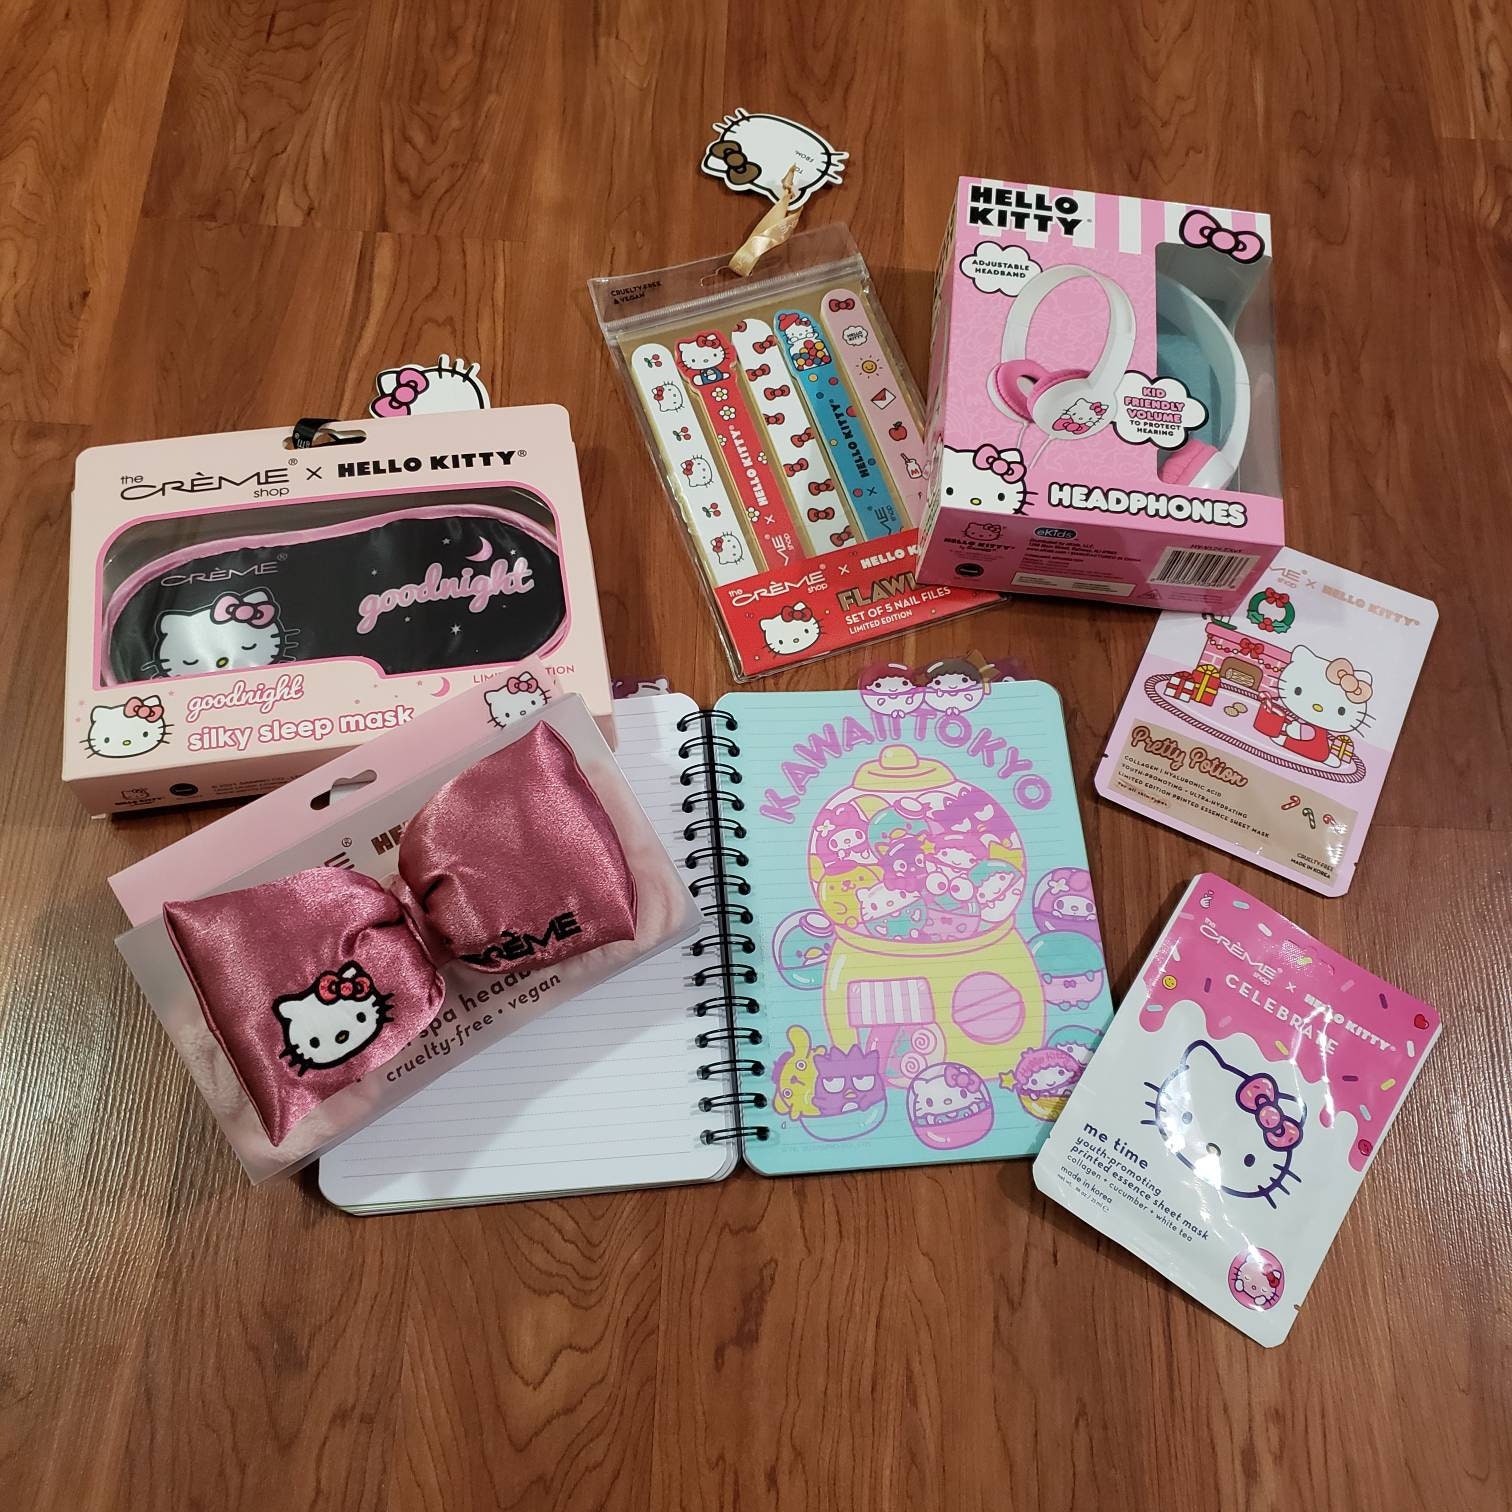 Lot of 7 New Hello Kitty by Sanrio X Creme Silky Sleep Mask Face Mask  Notebook Nail Files Headband Headphones Limited Edition Gift 